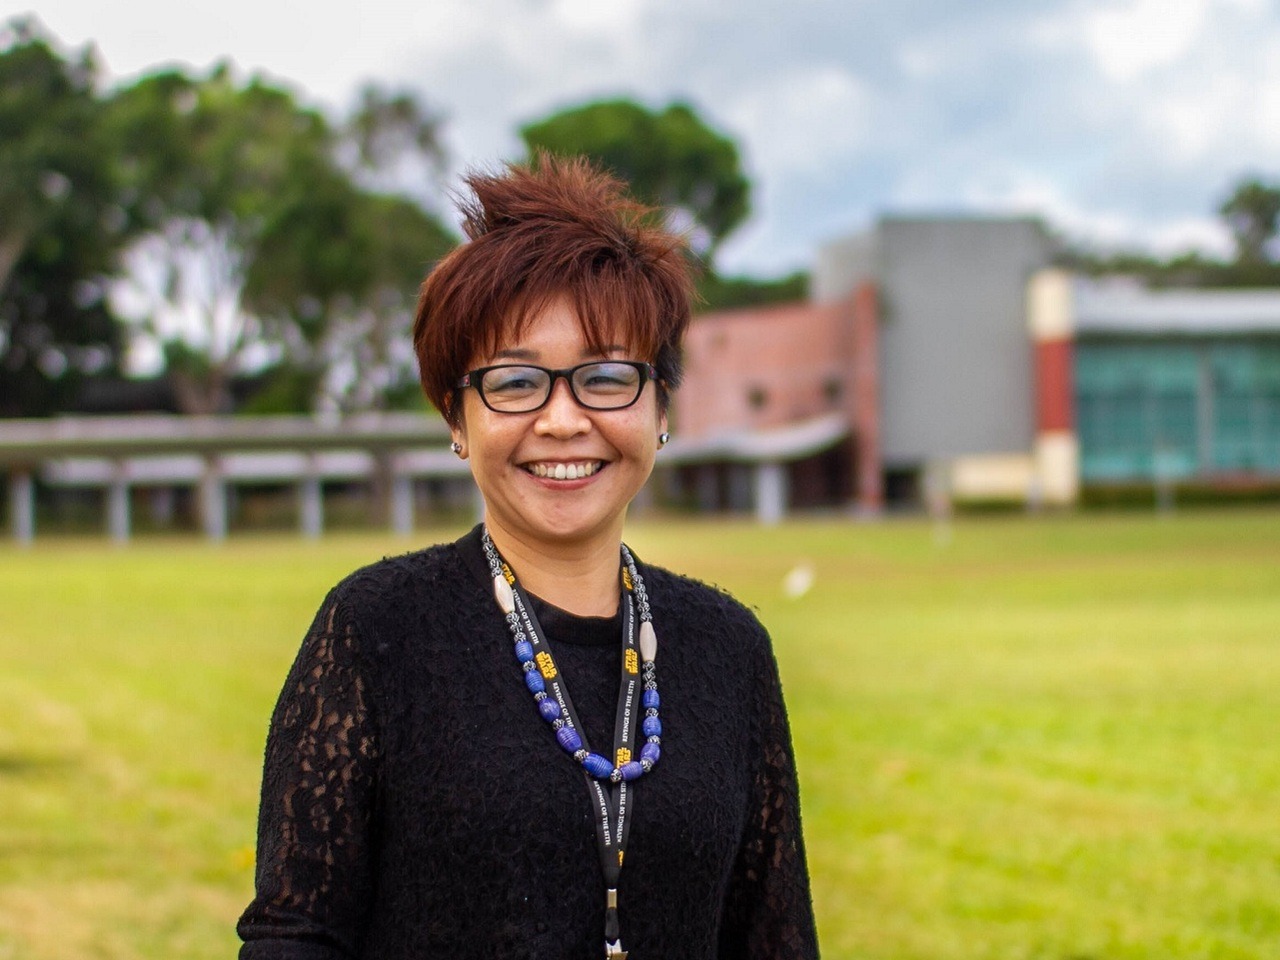 “My journey here at Curtin Malaysia began about 11 years ago. It has been a fantastic journey overall but there were a few bumps here and there. Pursuing my Master’s degree after completing my Bachelor’s was a real challenge as I had to balance my...